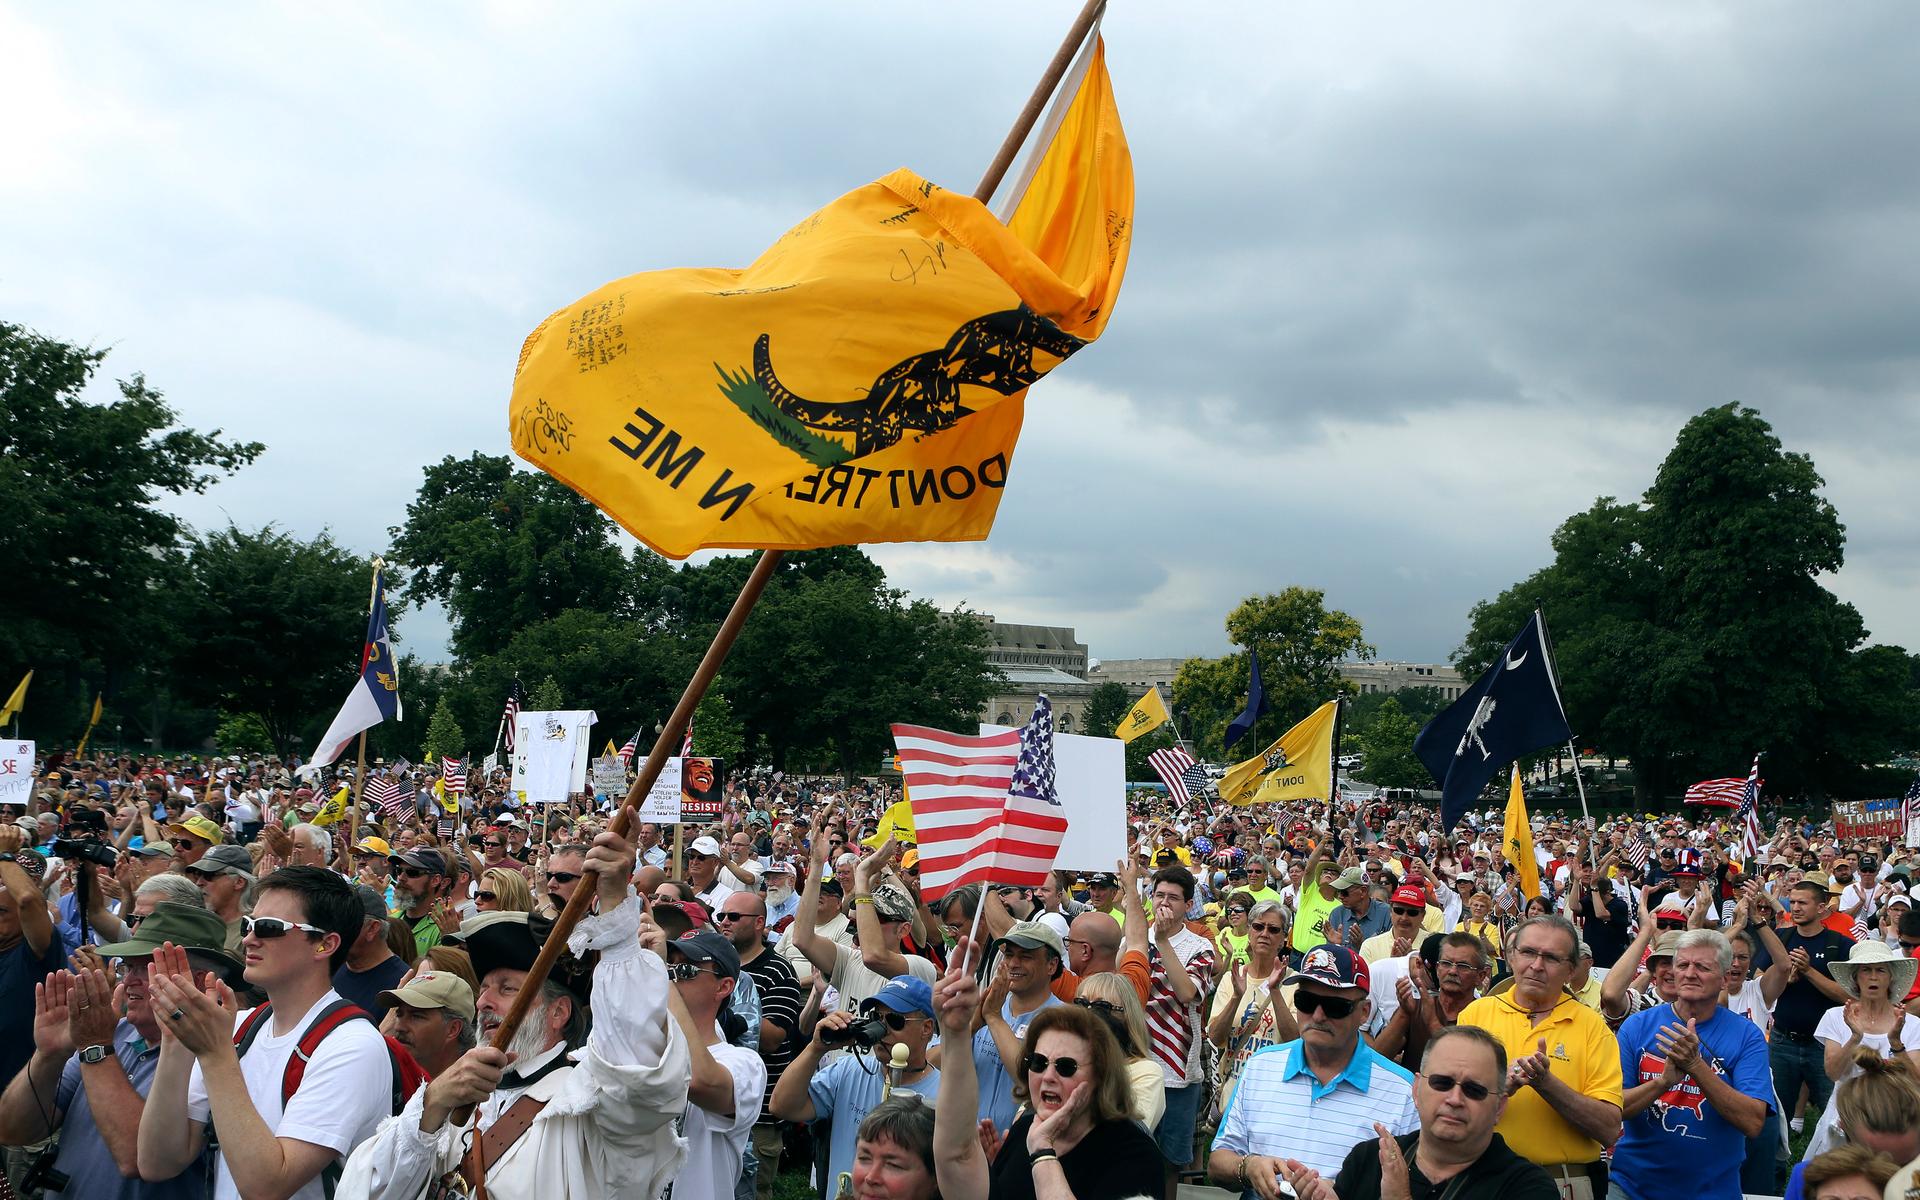 The crowd cheers during a Tea Party rally to "Audit the IRS" in front of the U.S. Capitol in Washington June 19, 2013